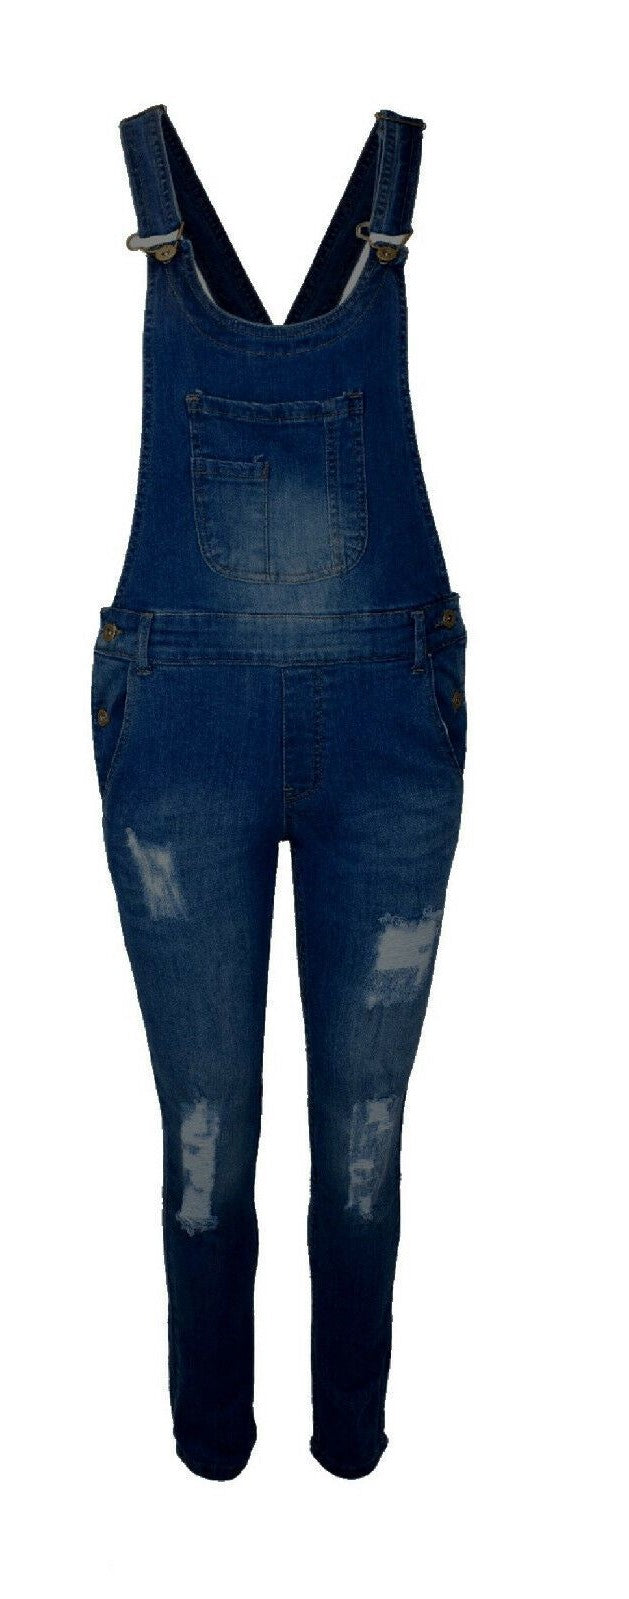 Ladies Dark Wash Ripped  Long Dungaree's In Sizes 8-22. The Straps Are Adjustable And Has 2 Side Pockets.